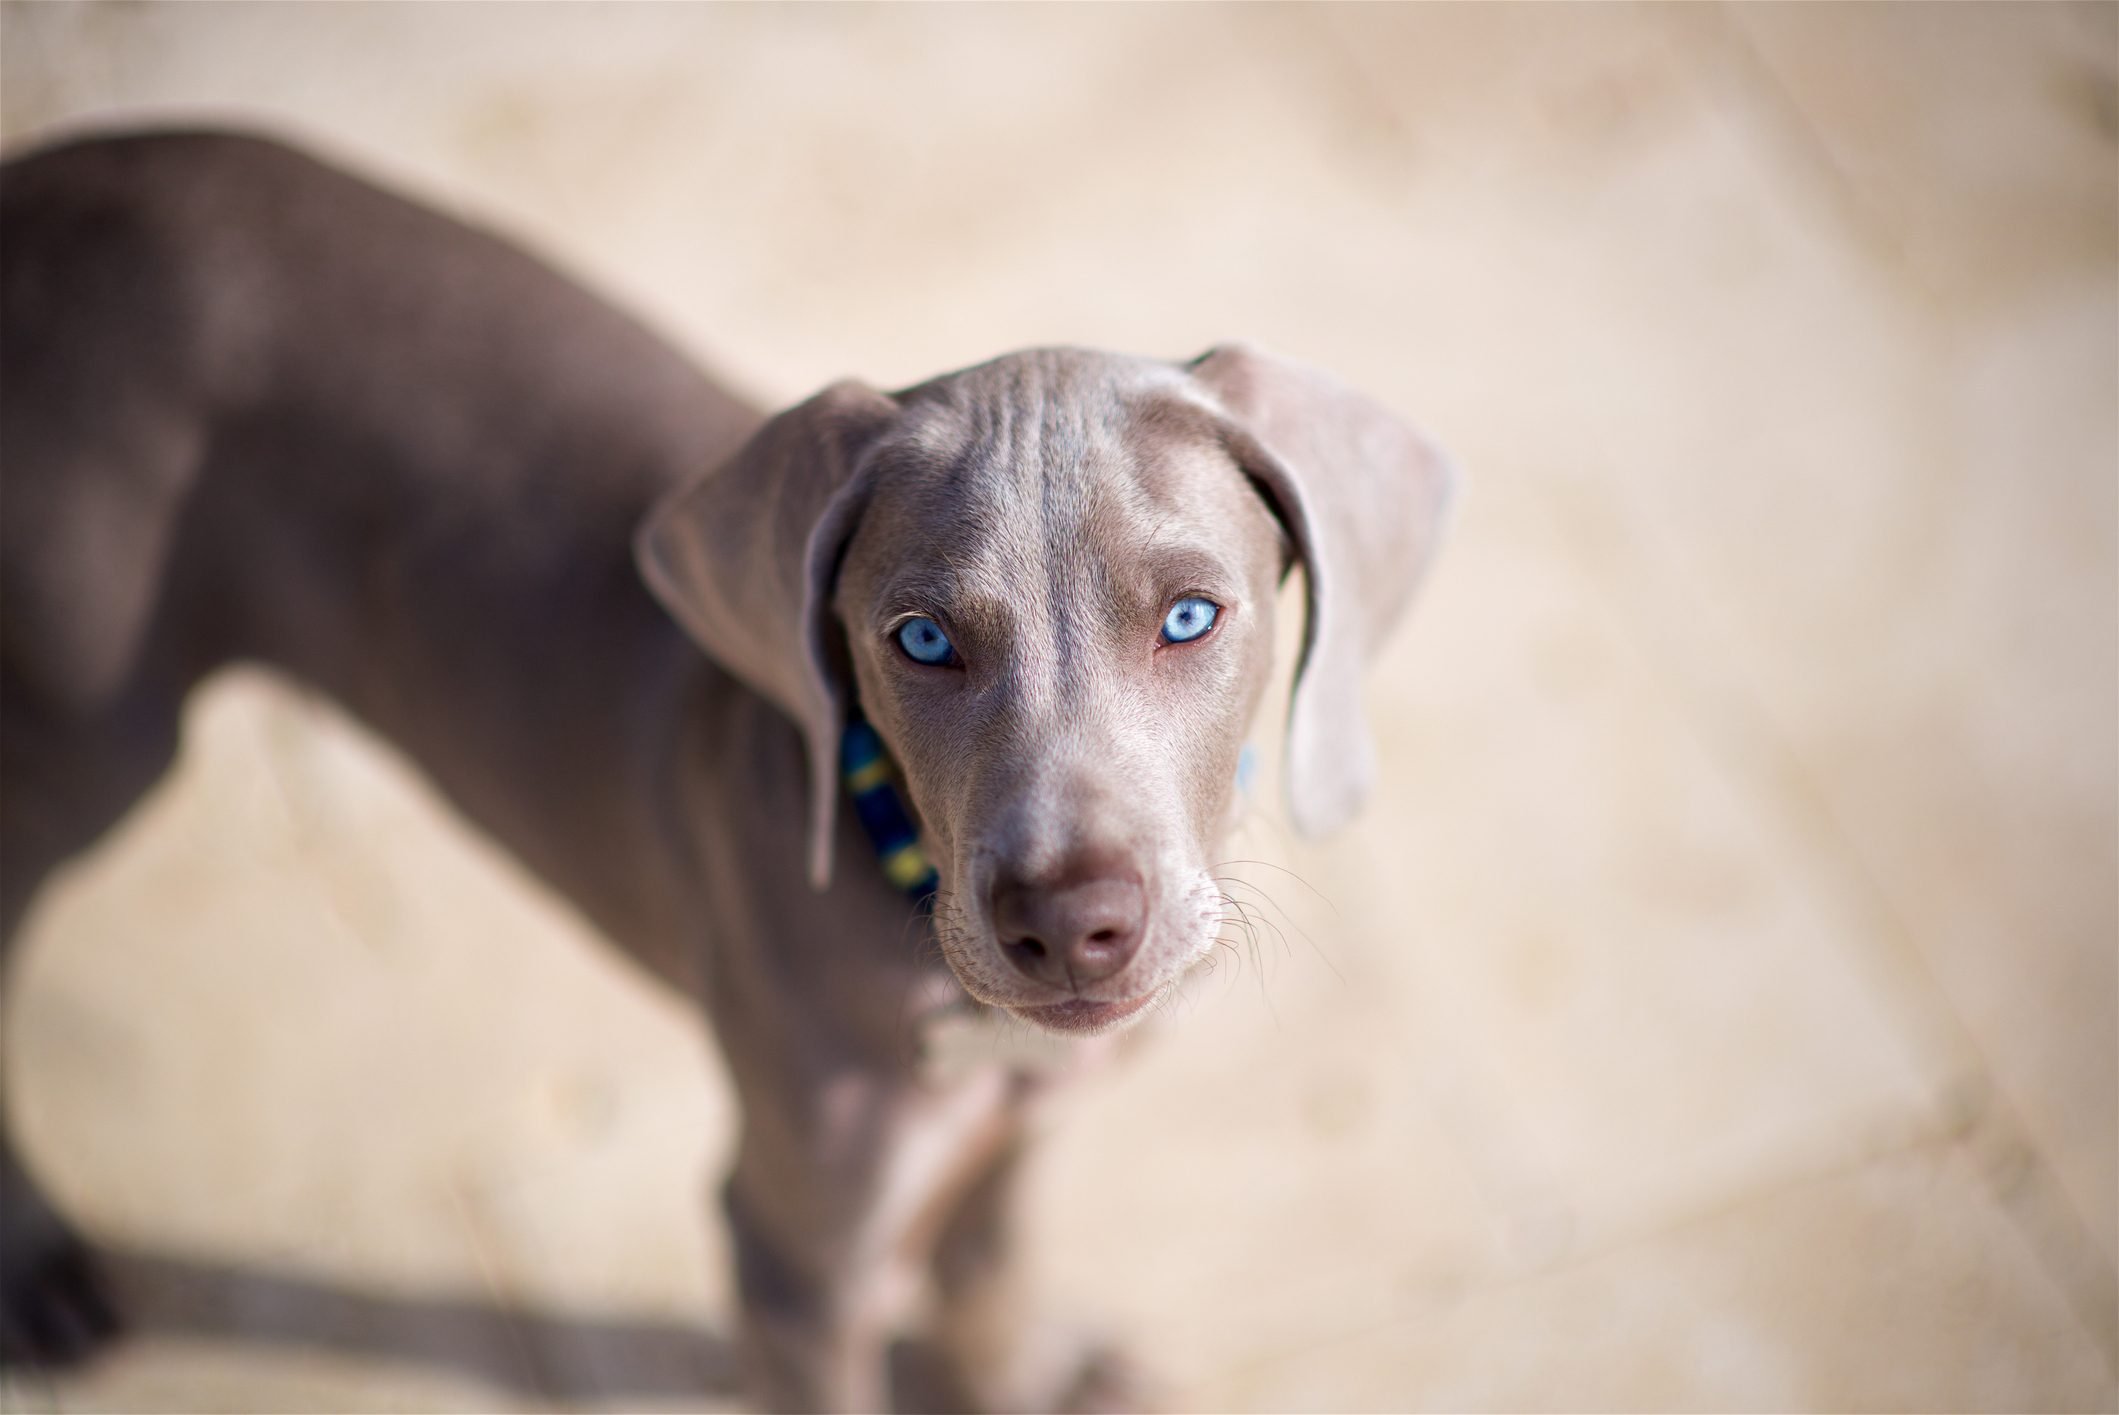 12 Dog Breeds with Beautiful Blue Eyes - Reader's Digest